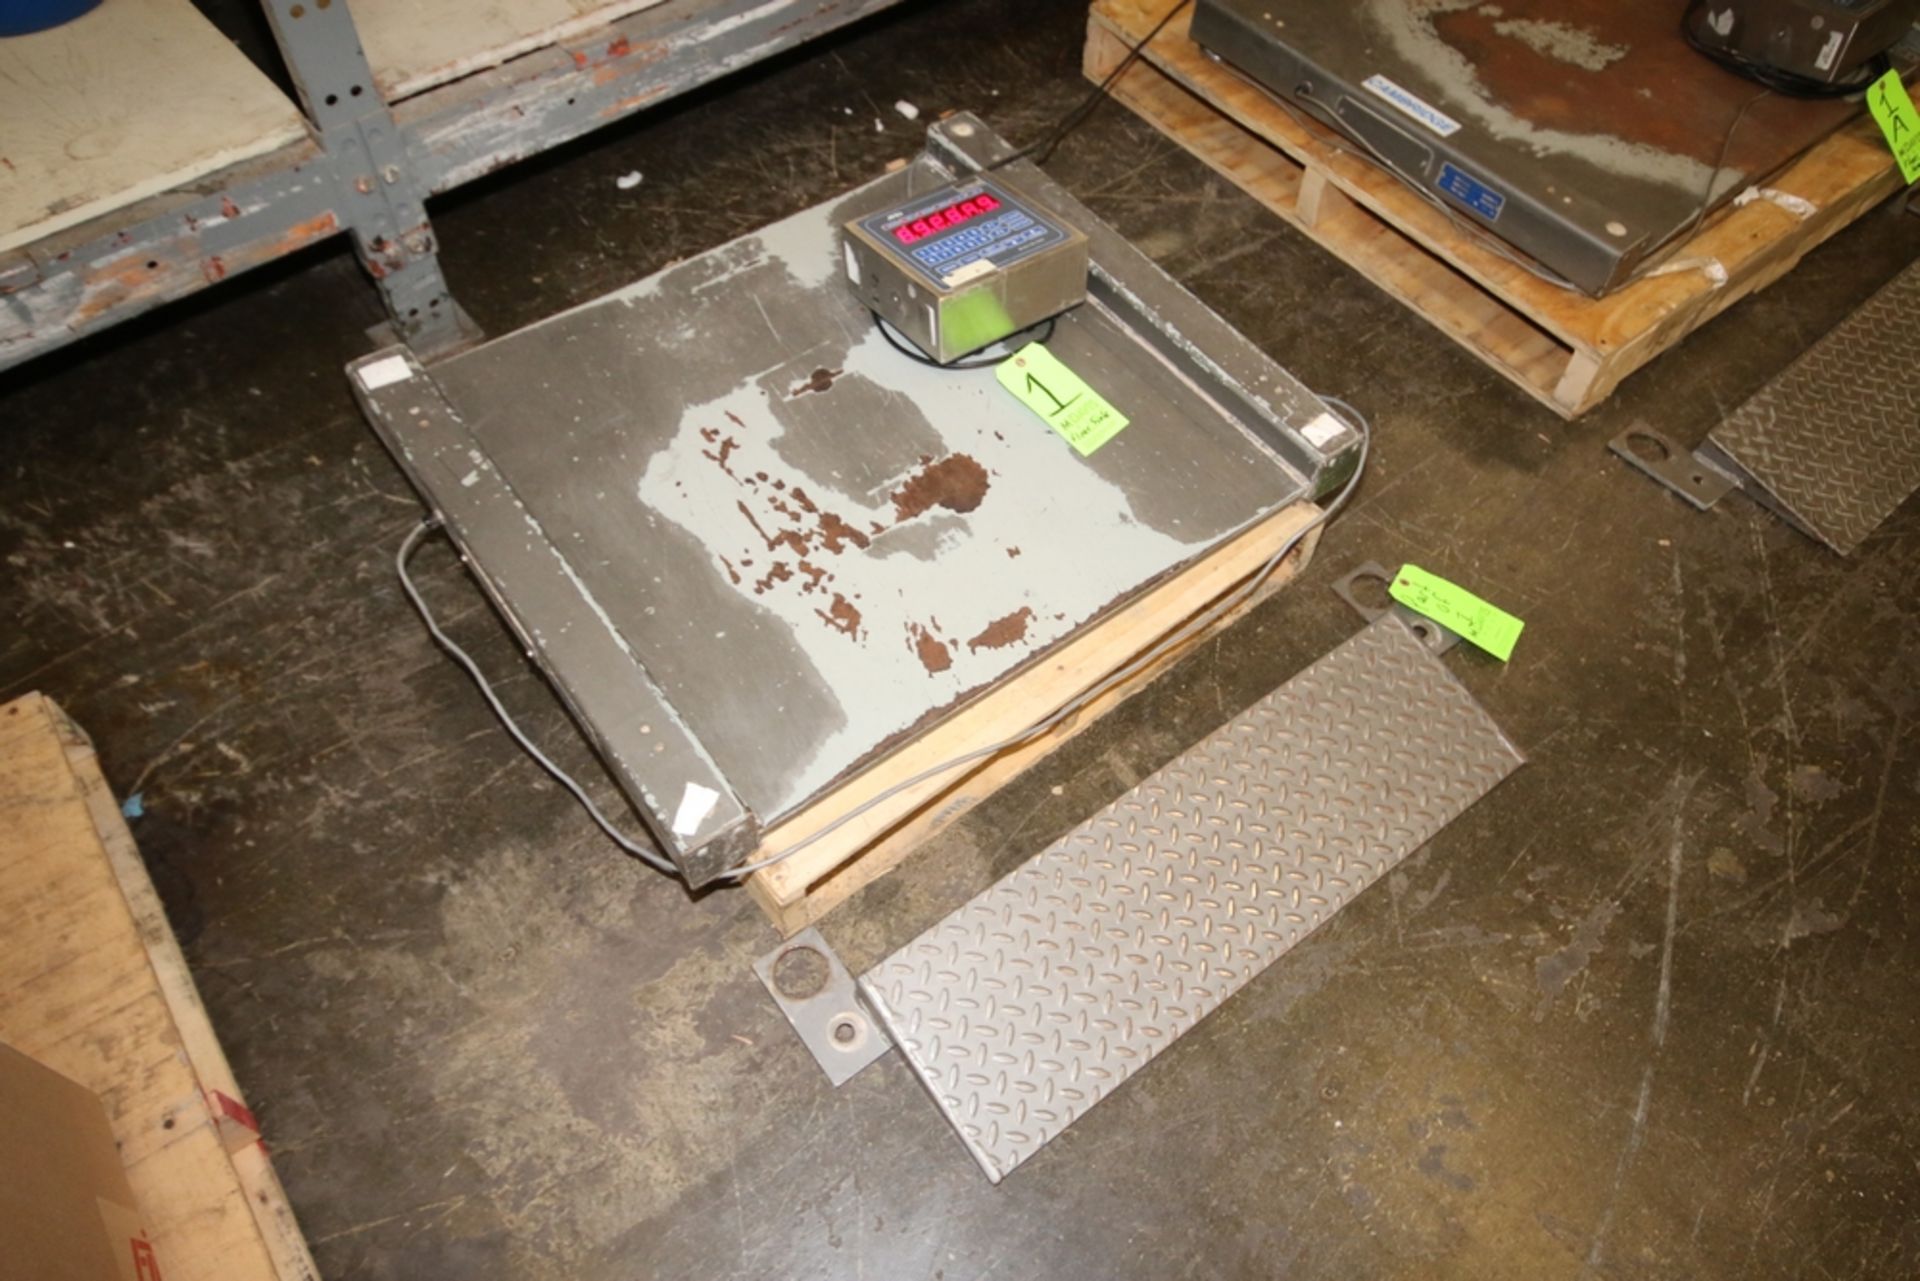 AND S/S Floor Scale with Ramp, M/N AD-5000, with Aprox. 30" L x 30" W Floor Platform, with Digital - Image 2 of 4